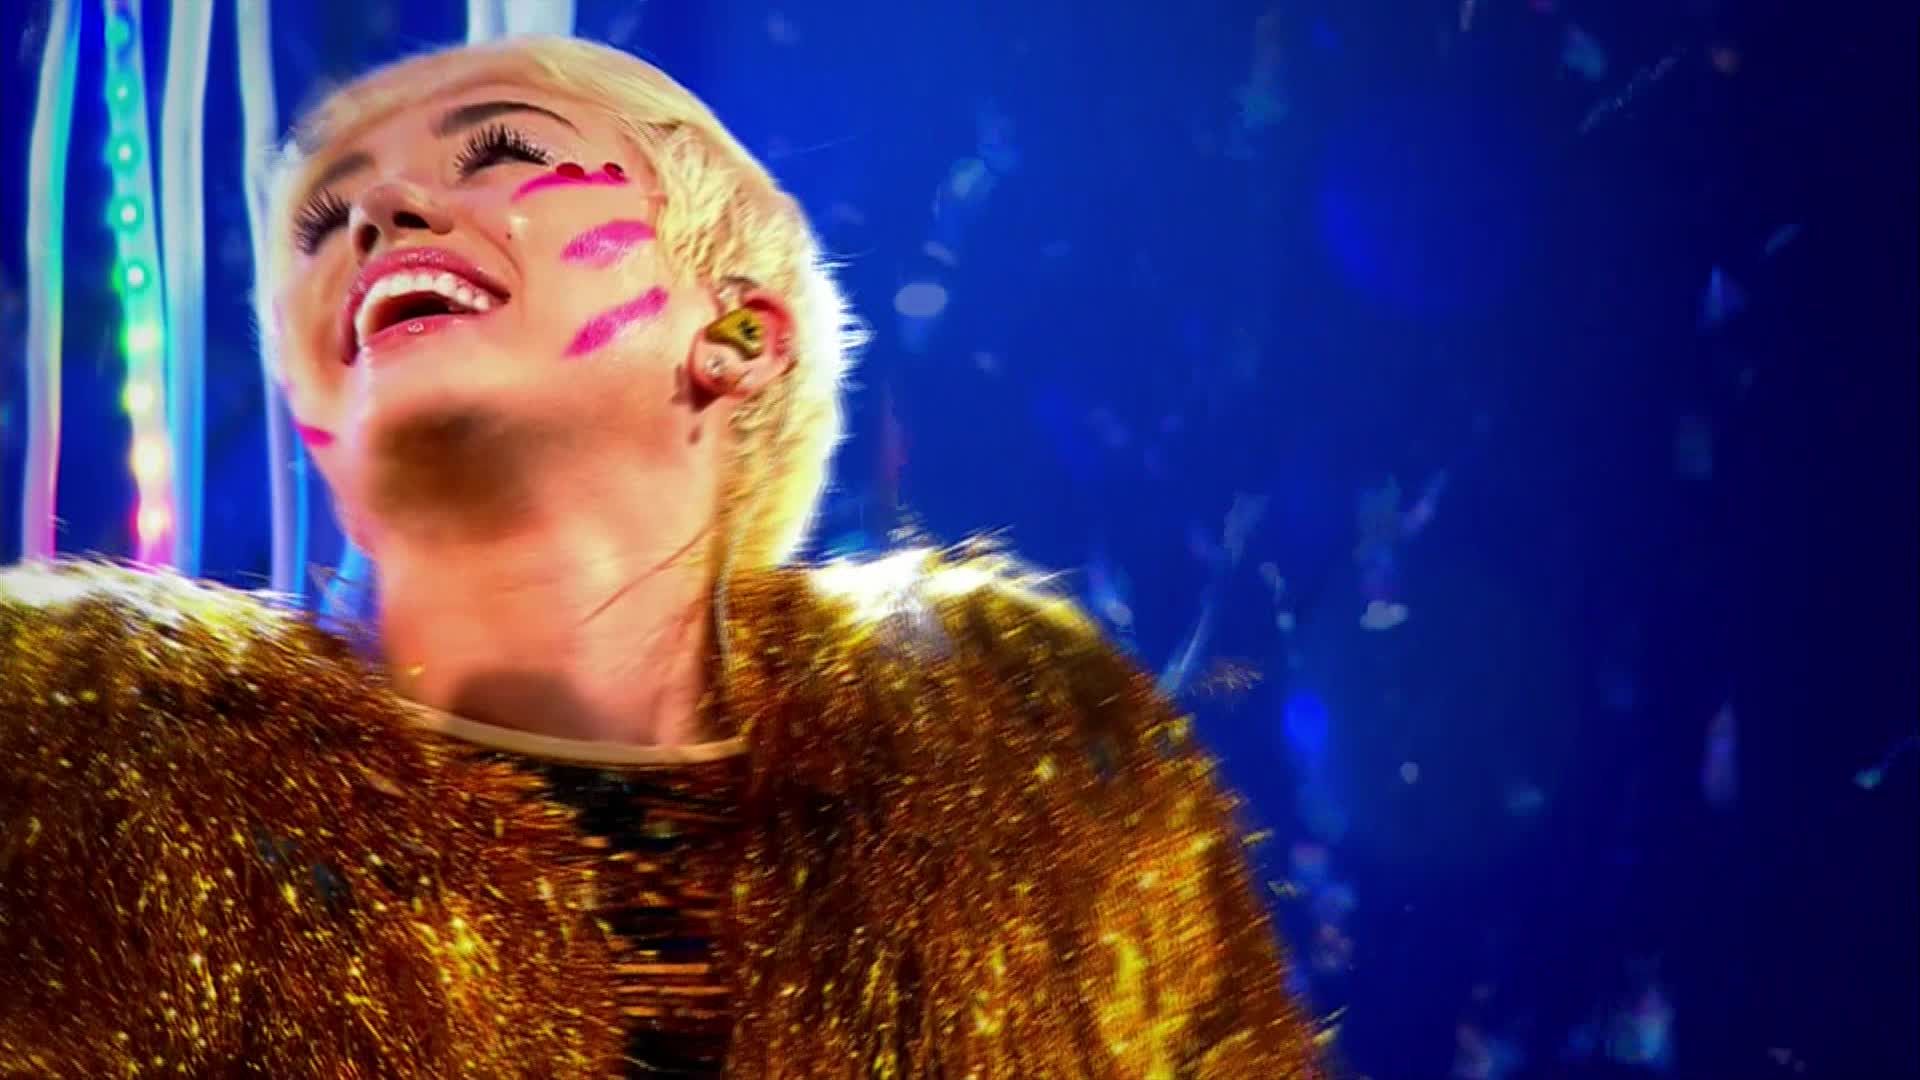 Miley Cyrus [ft The Flaming Lips] - 2014-05-18, Billboard Music Awards - 1080 TS - LSD preview 2